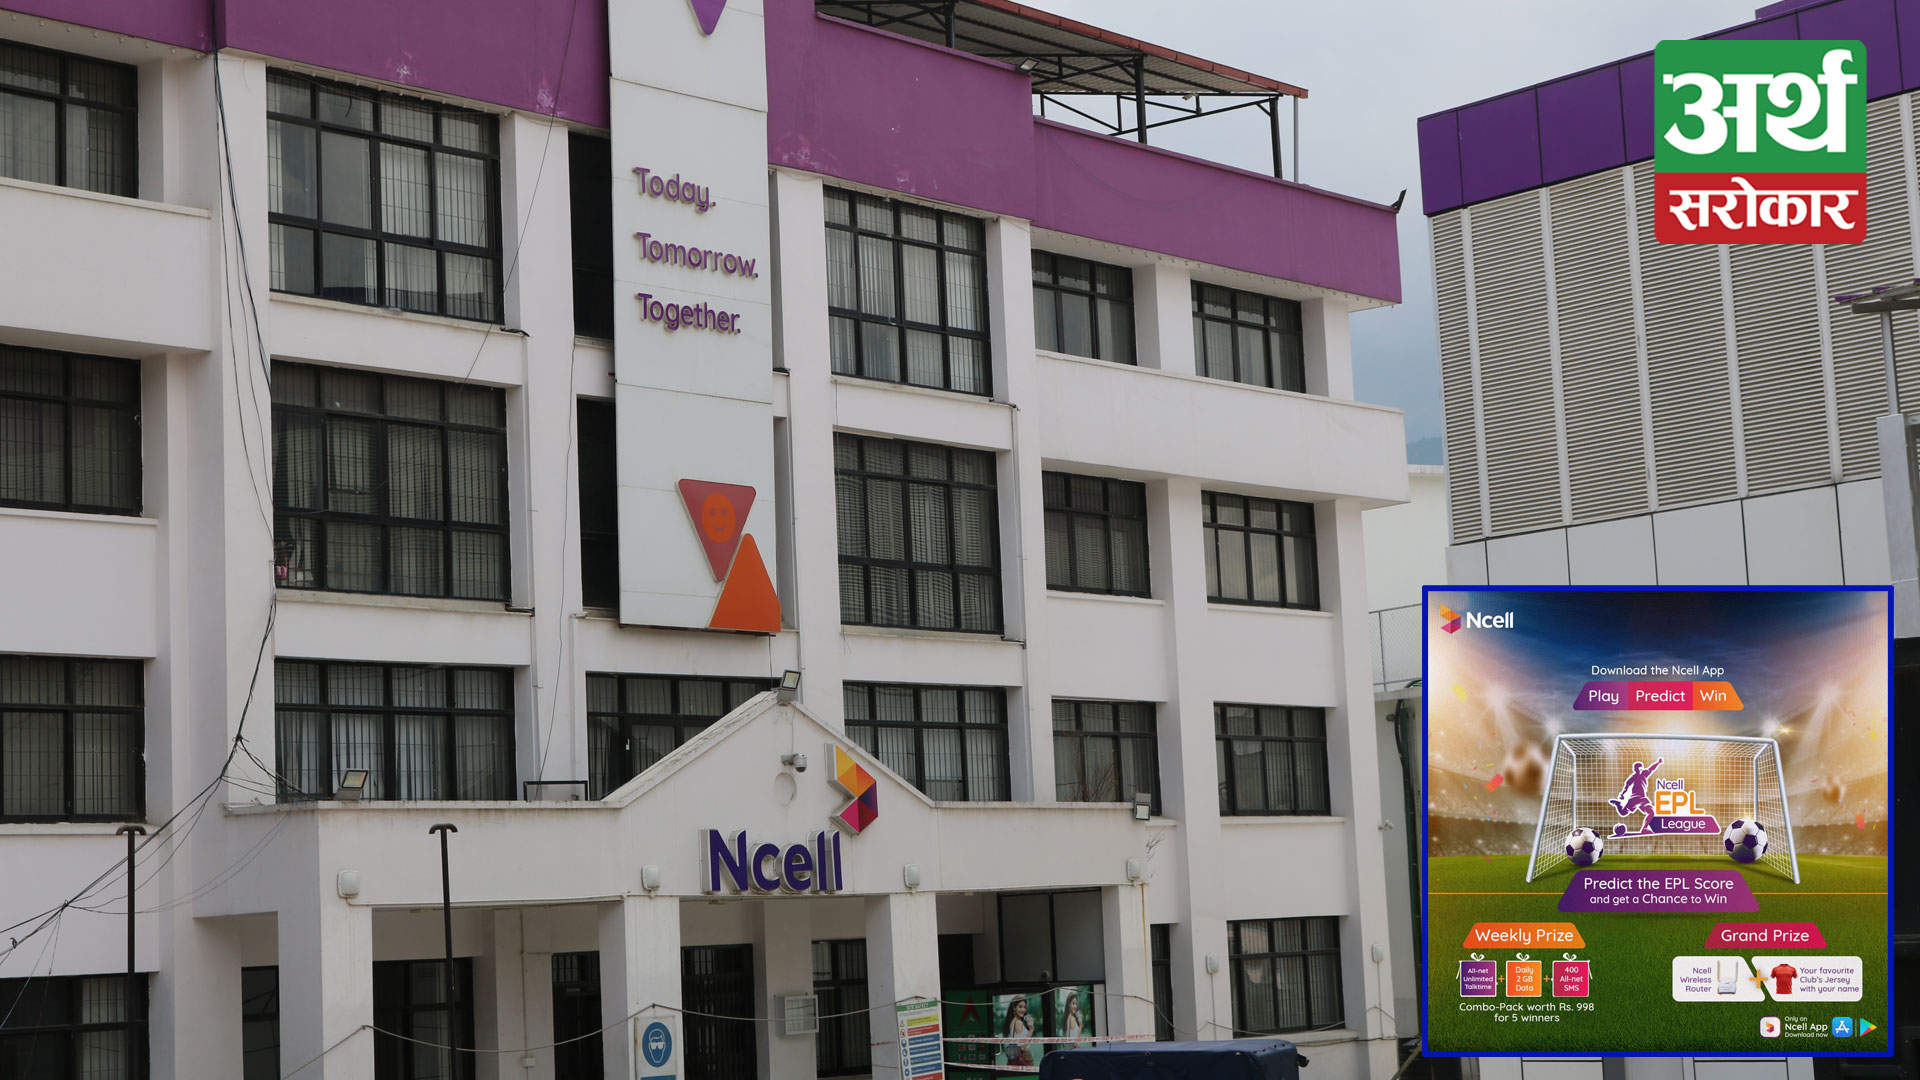 Ncell’s ‘Ncell EPL League’ contest